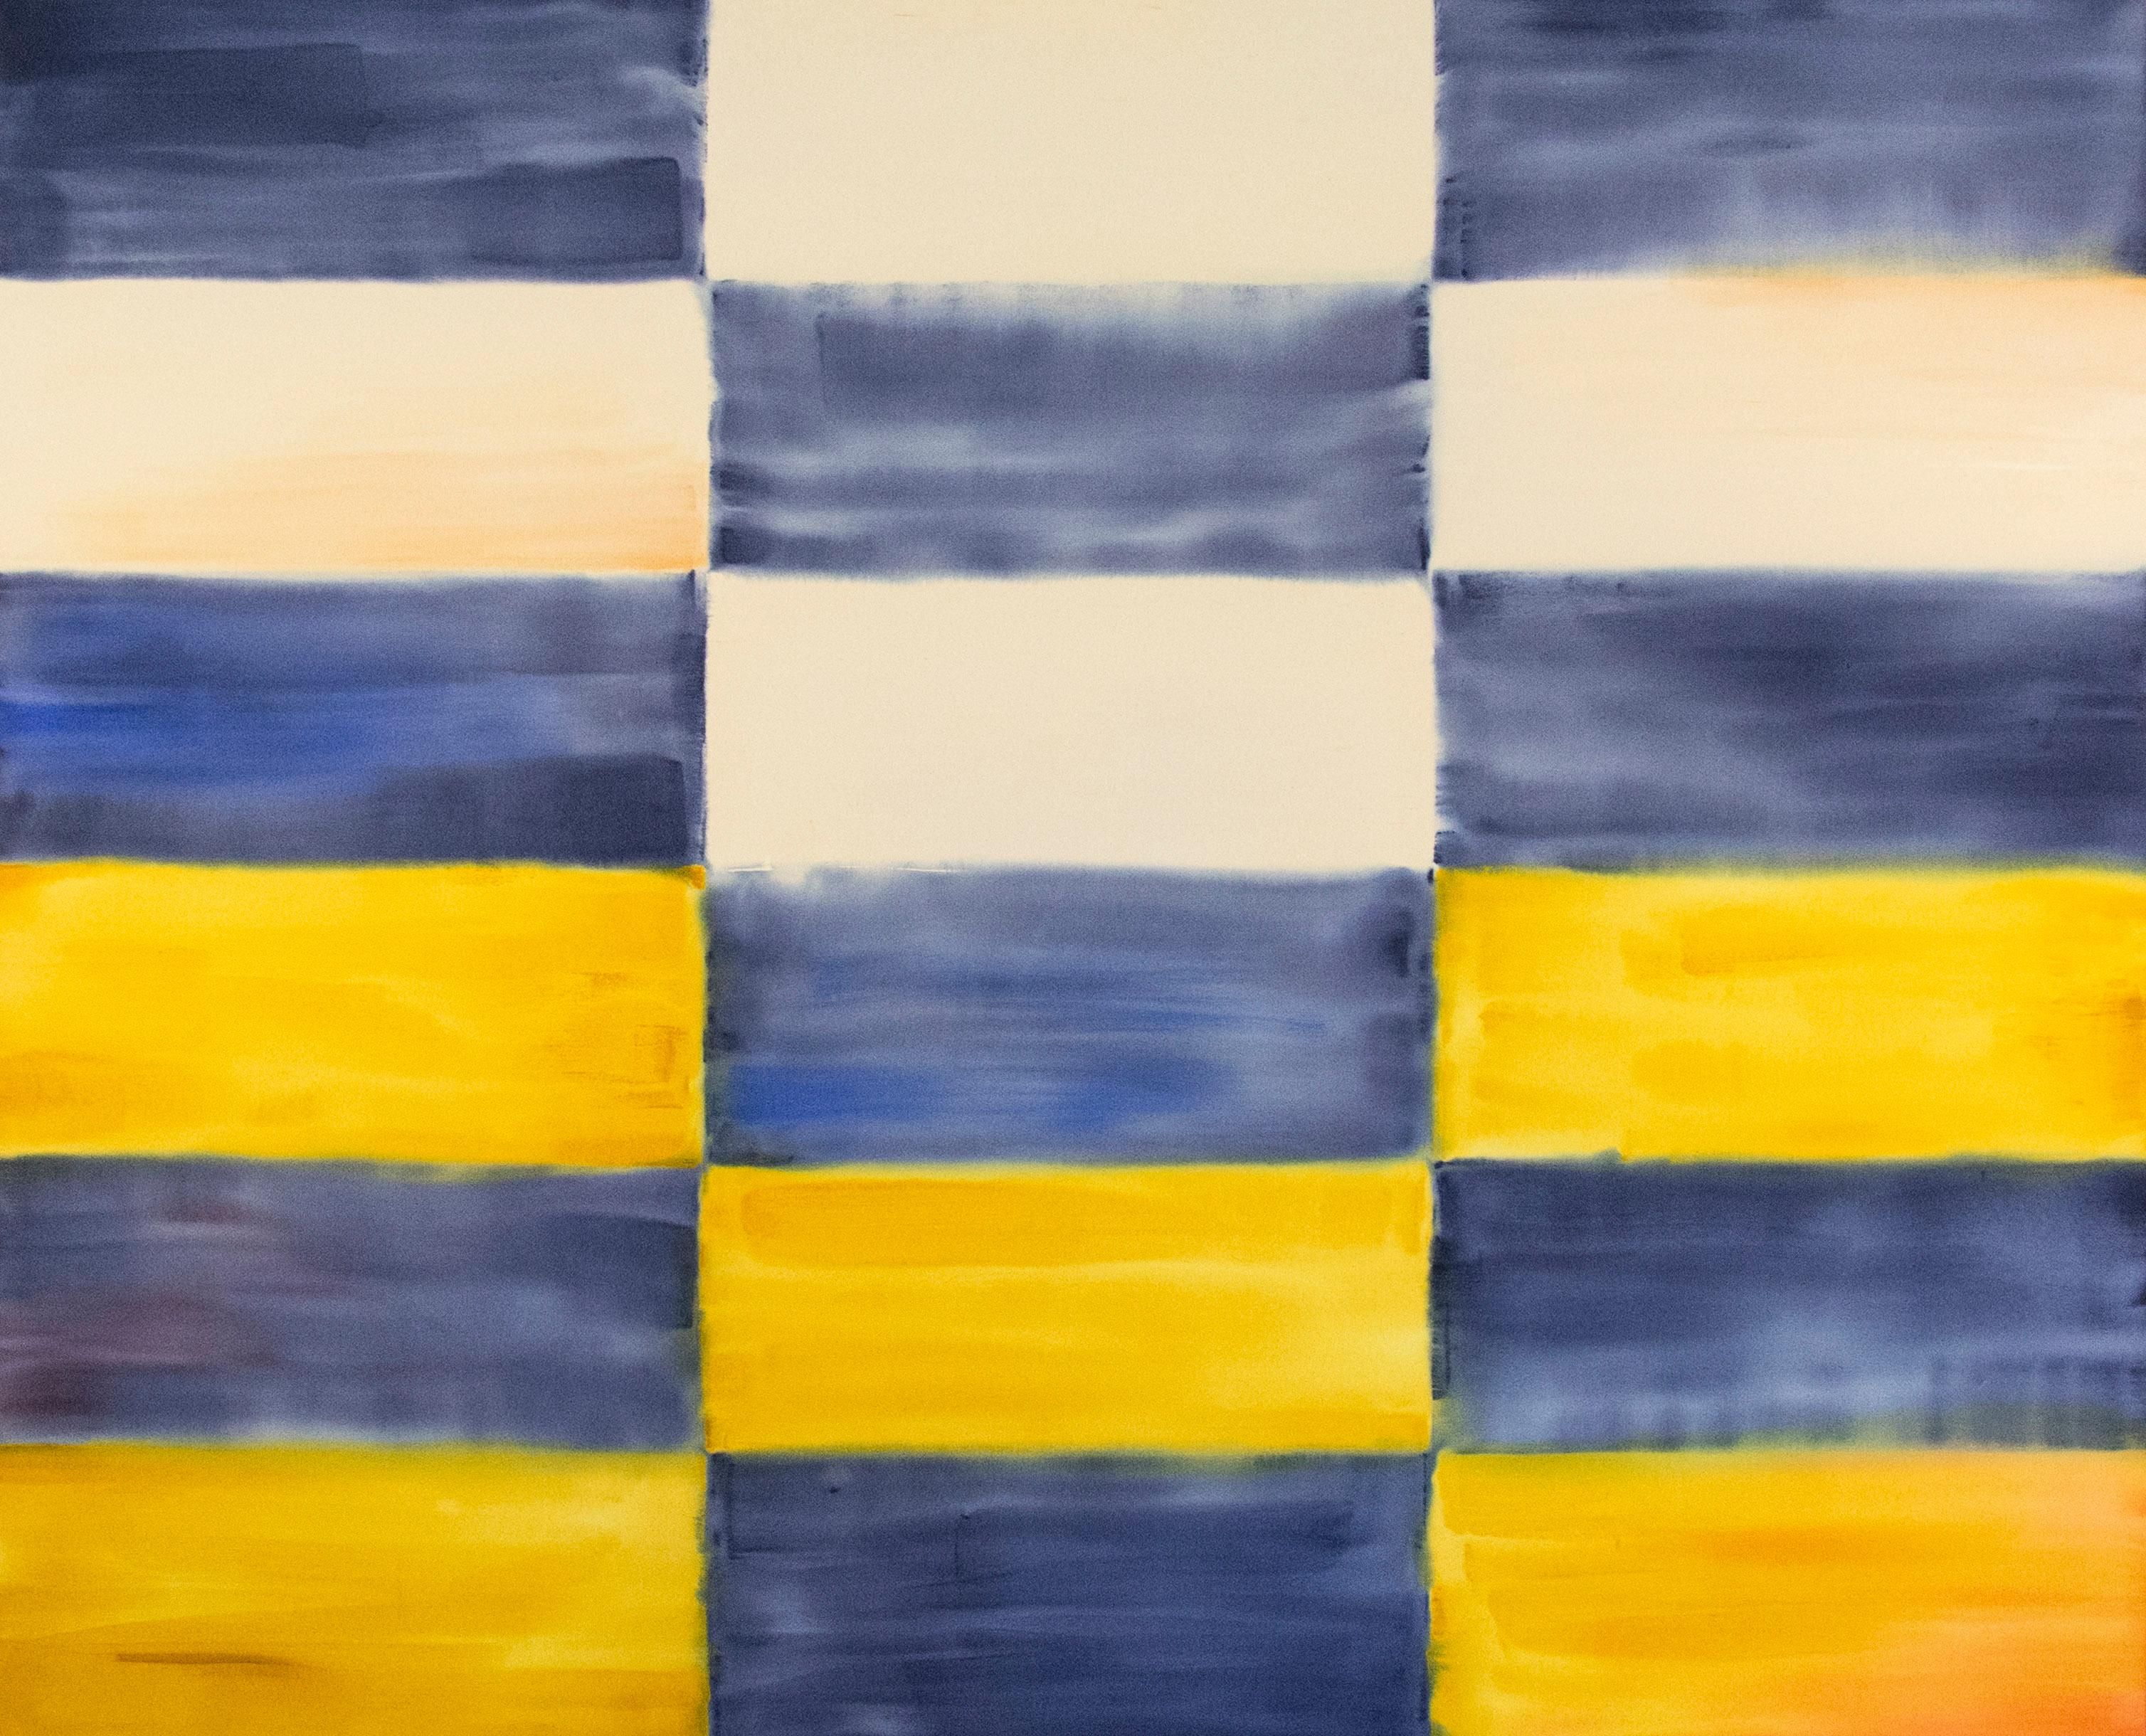 Turner - large, blue, white, yellow, colourful, grid, abstract acrylic on canvas - Painting by Milly Ristvedt